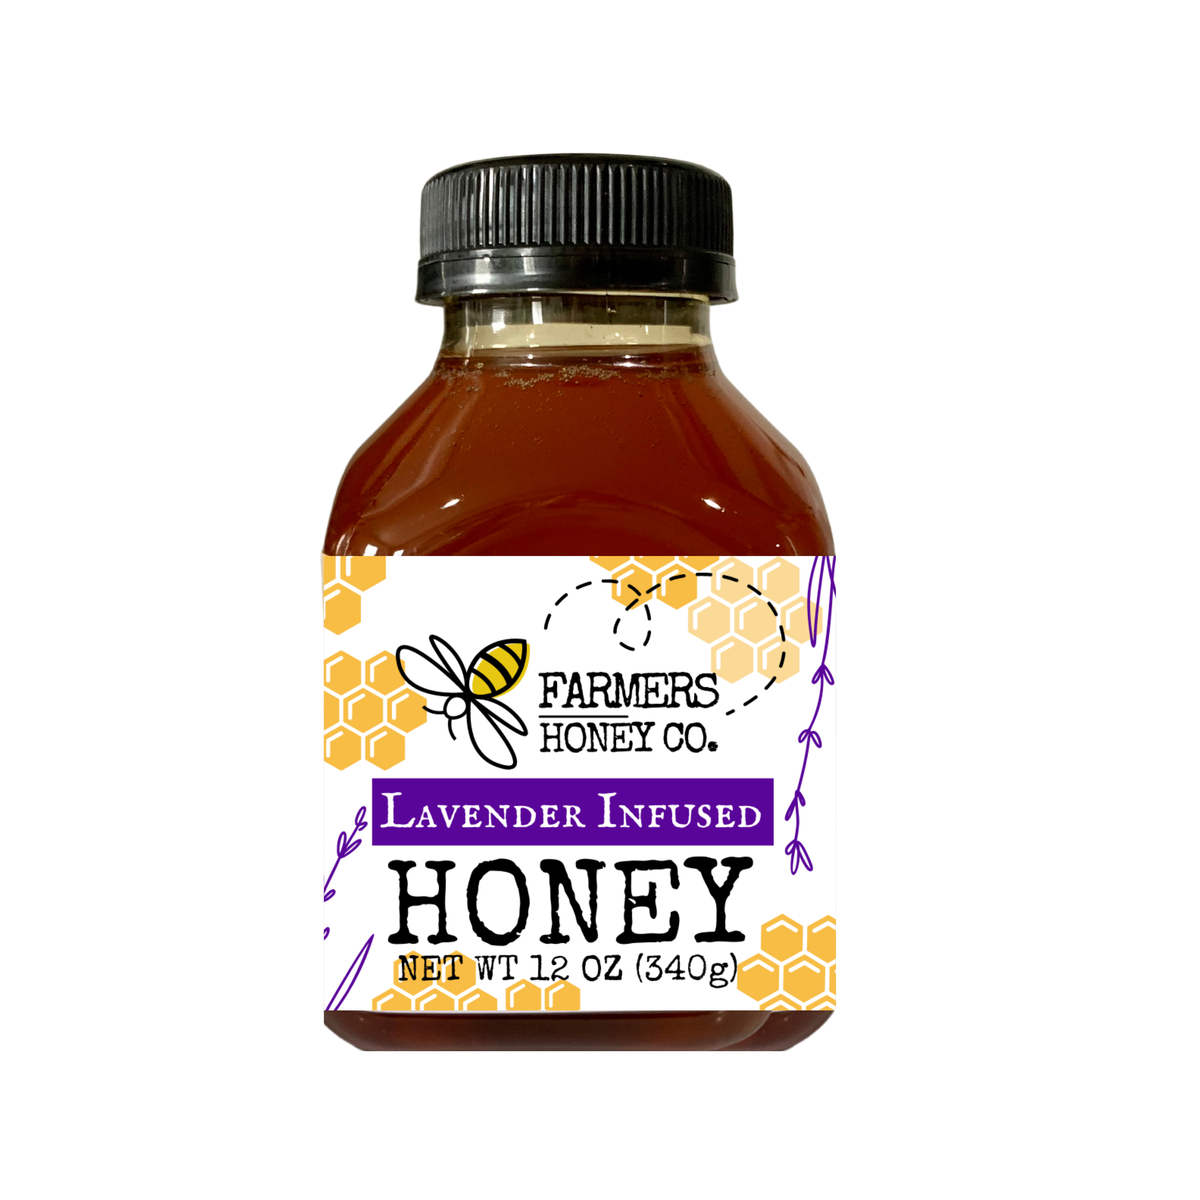 A jar of FARMERS Lavender Co. Lavender Infused Honey labeled "Farmers Honey Co." with illustrations of honeycombs and a bee. The container displays the product weight as 12 oz (340g) and mentions